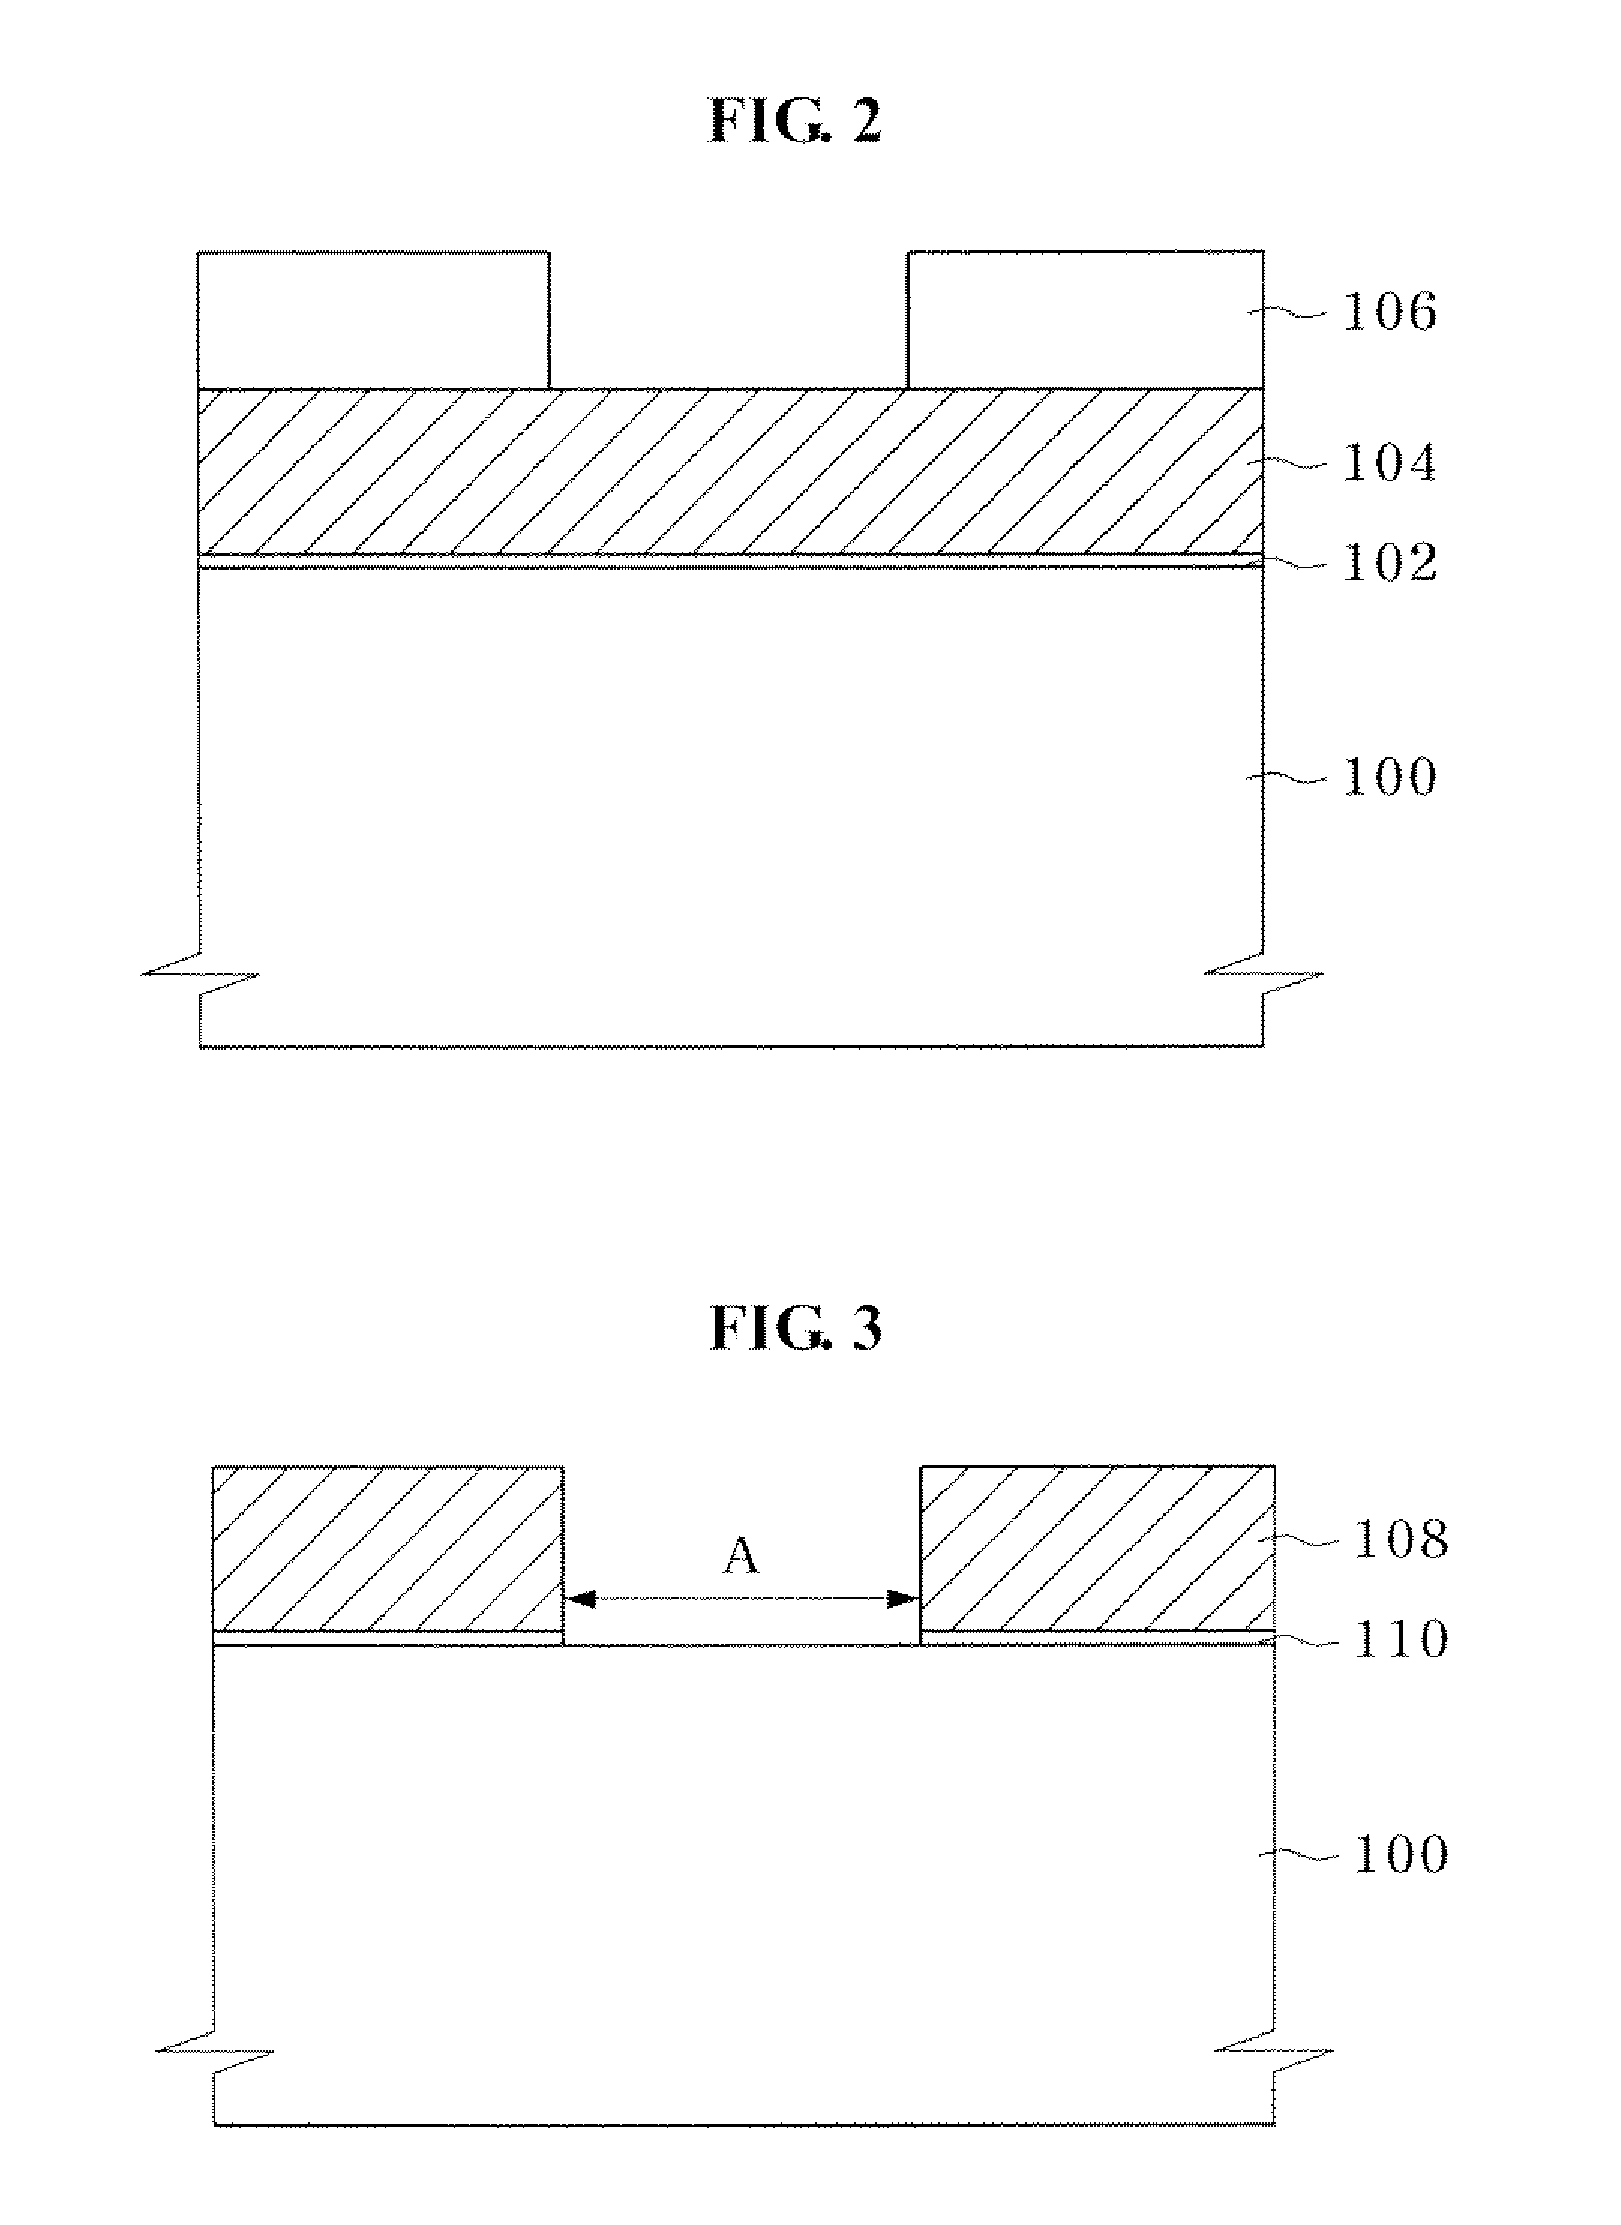 Method for fabricating an isolation layer in a semiconductor device